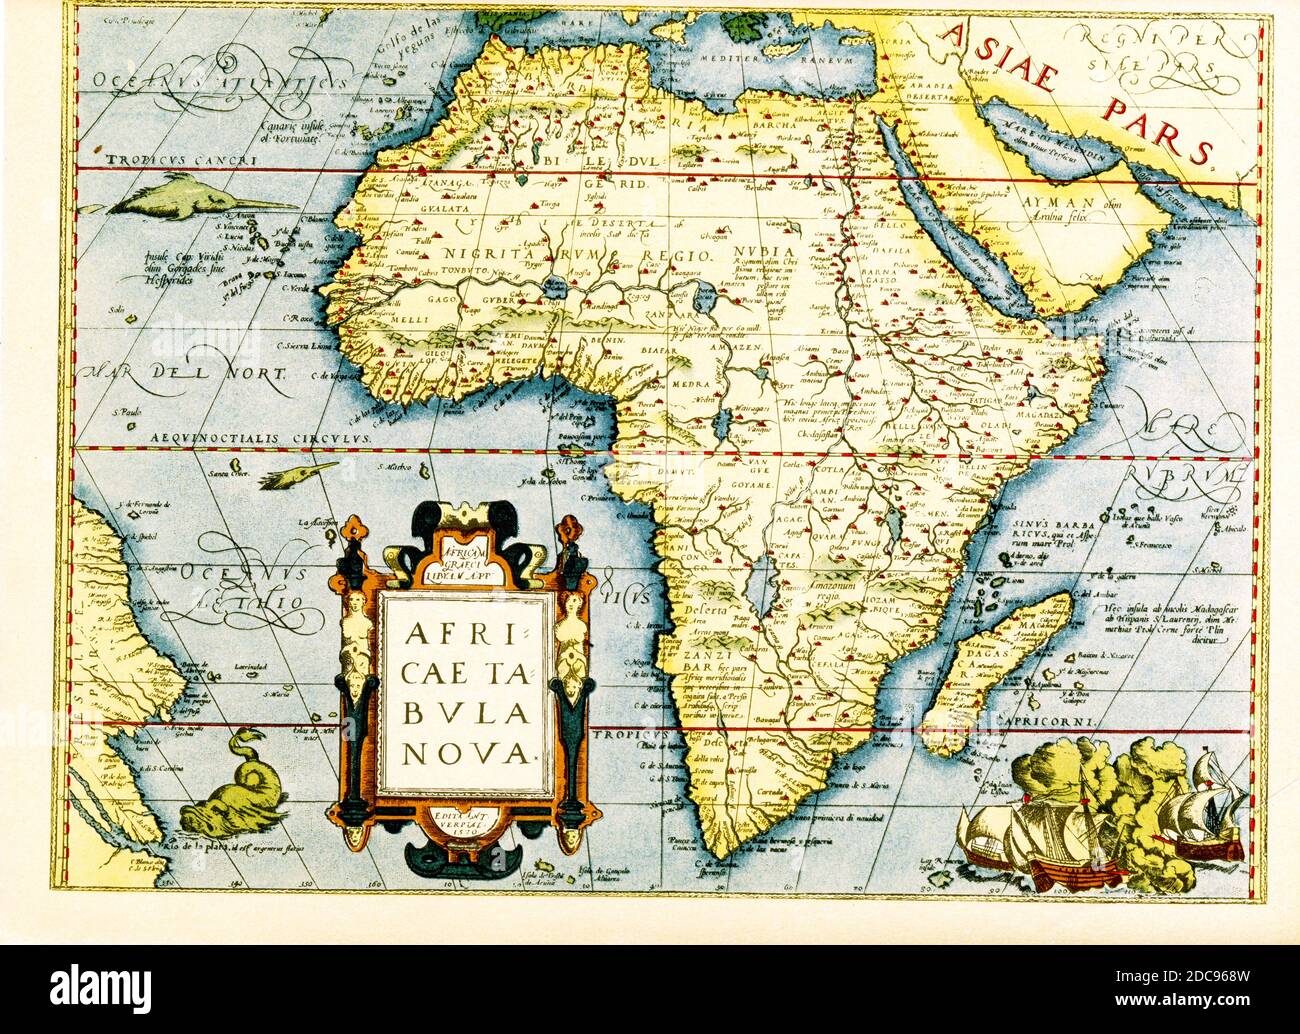 Map of Africa - the inset in lower left titles it: Africa tabula Nova. Below that is the date 1570 and the place Antwerp. The cartographer is Abraham Ortelius, a Dutch cartographer, geographer, and cosmographer, conventionally recognized as the creator of the first modern atlas, the Theatrum Orbis Terrarum. Stock Photo